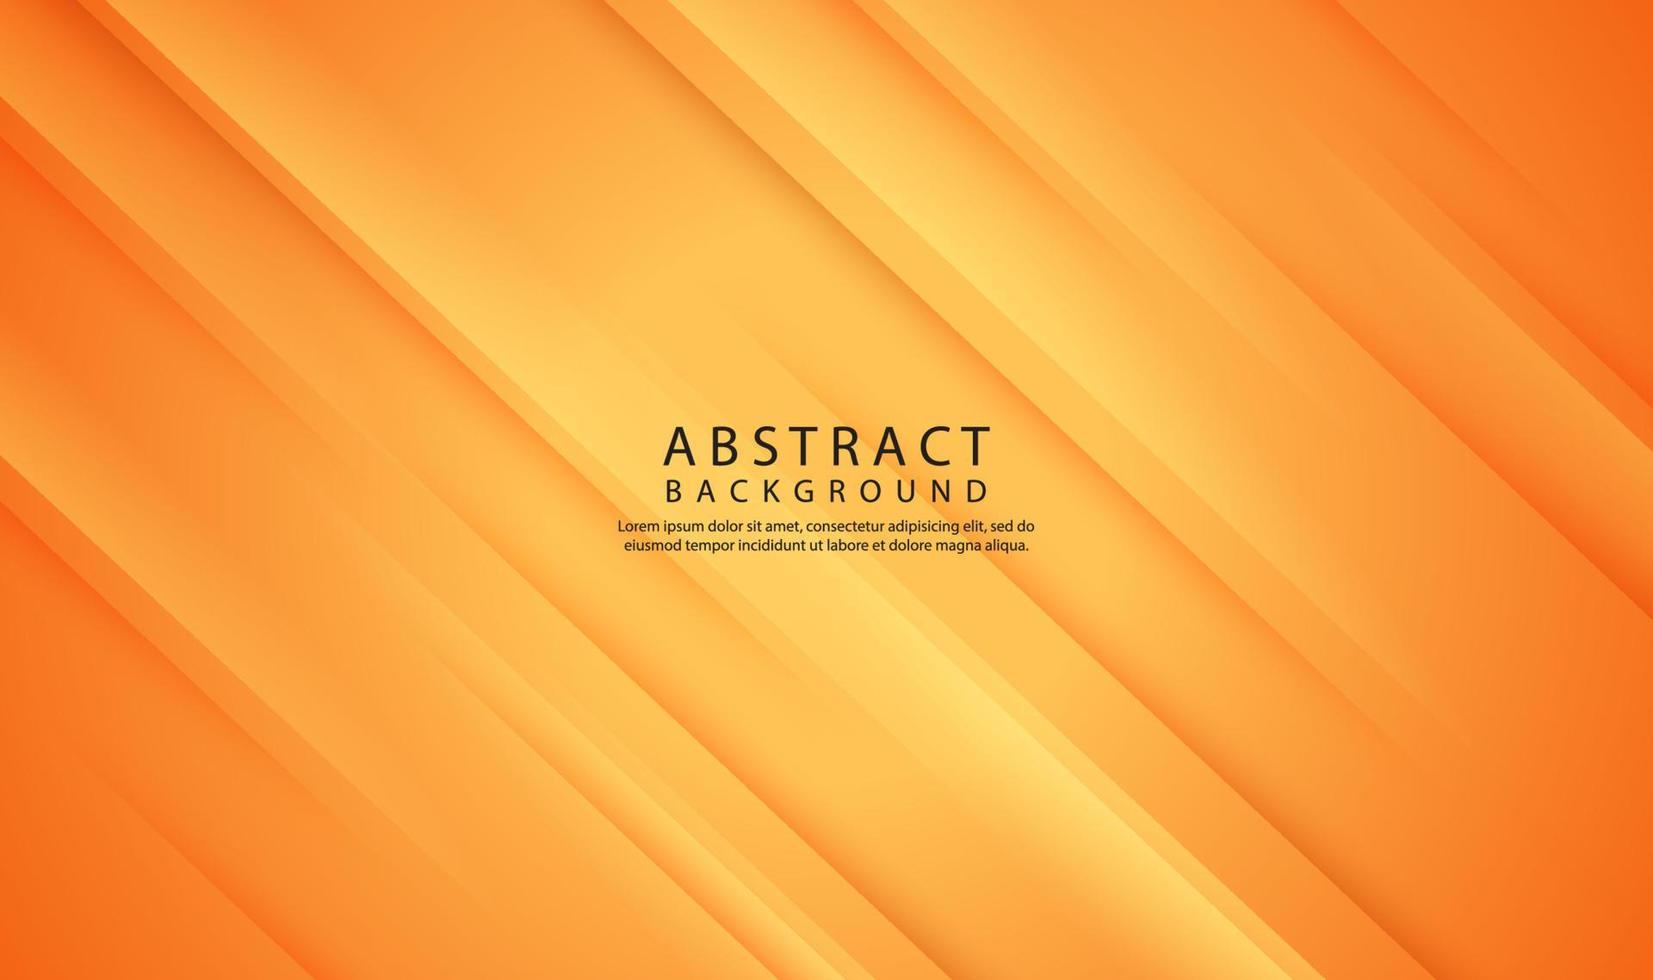 3D orange geometric abstract background overlap layer on bright space with line cut texture effect. Graphic design element elegant style concept for banner flyer, card, brochure cover, or landing page vector